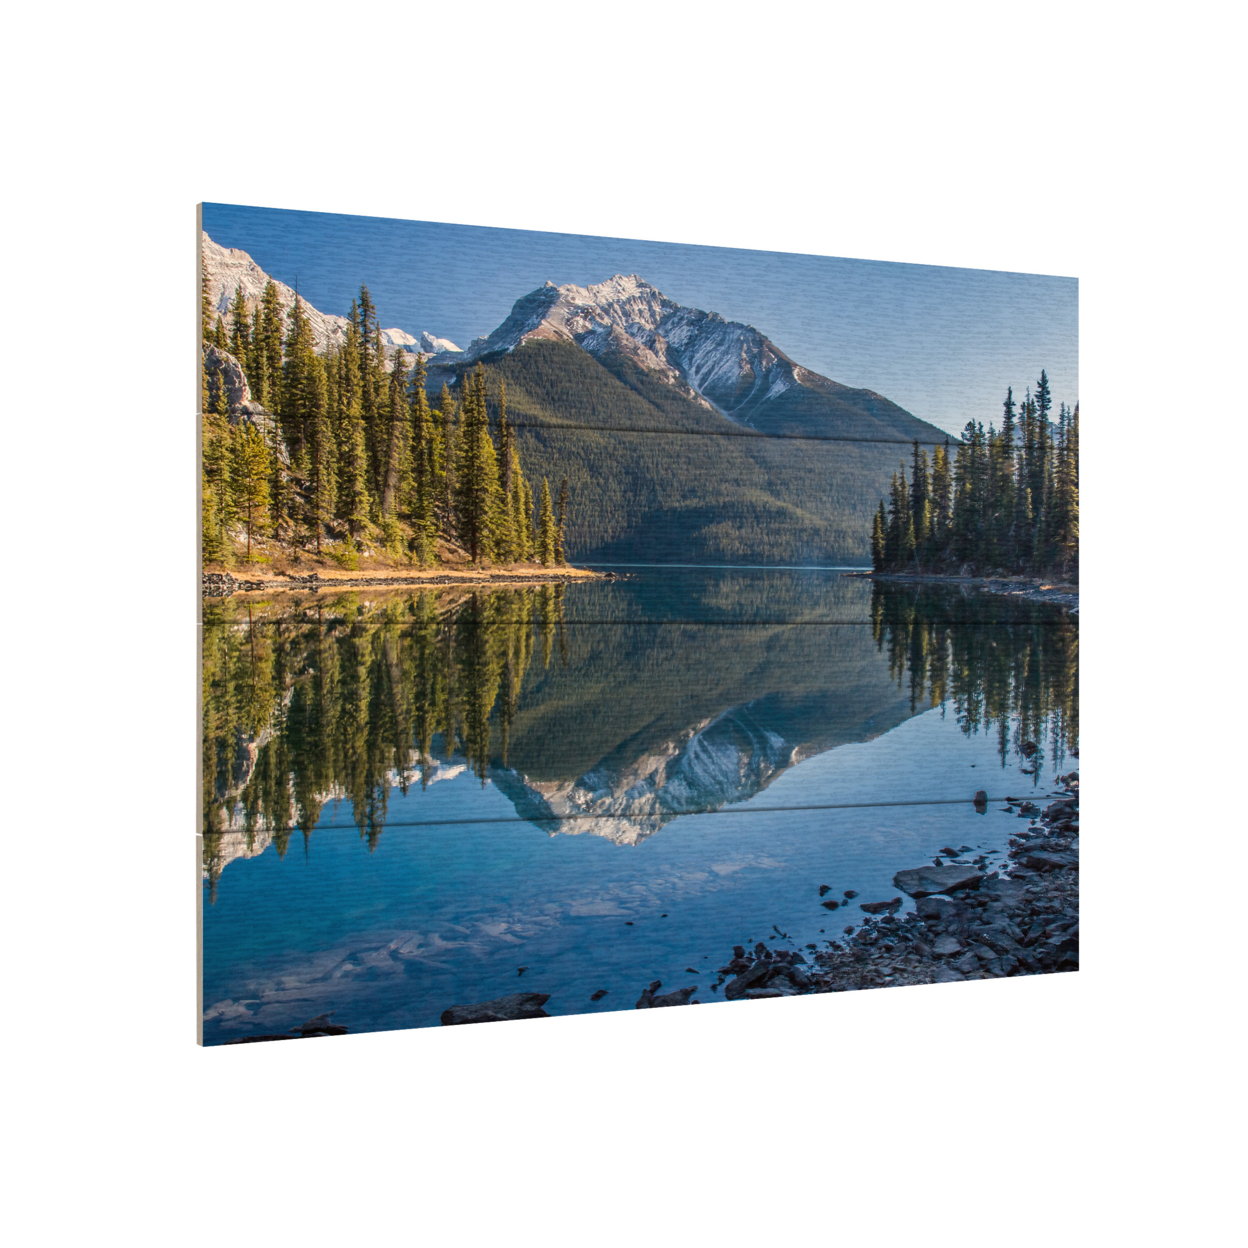 Wall Art 12 X 16 Inches Titled Jasper Morning Ready To Hang Printed On Wooden Planks